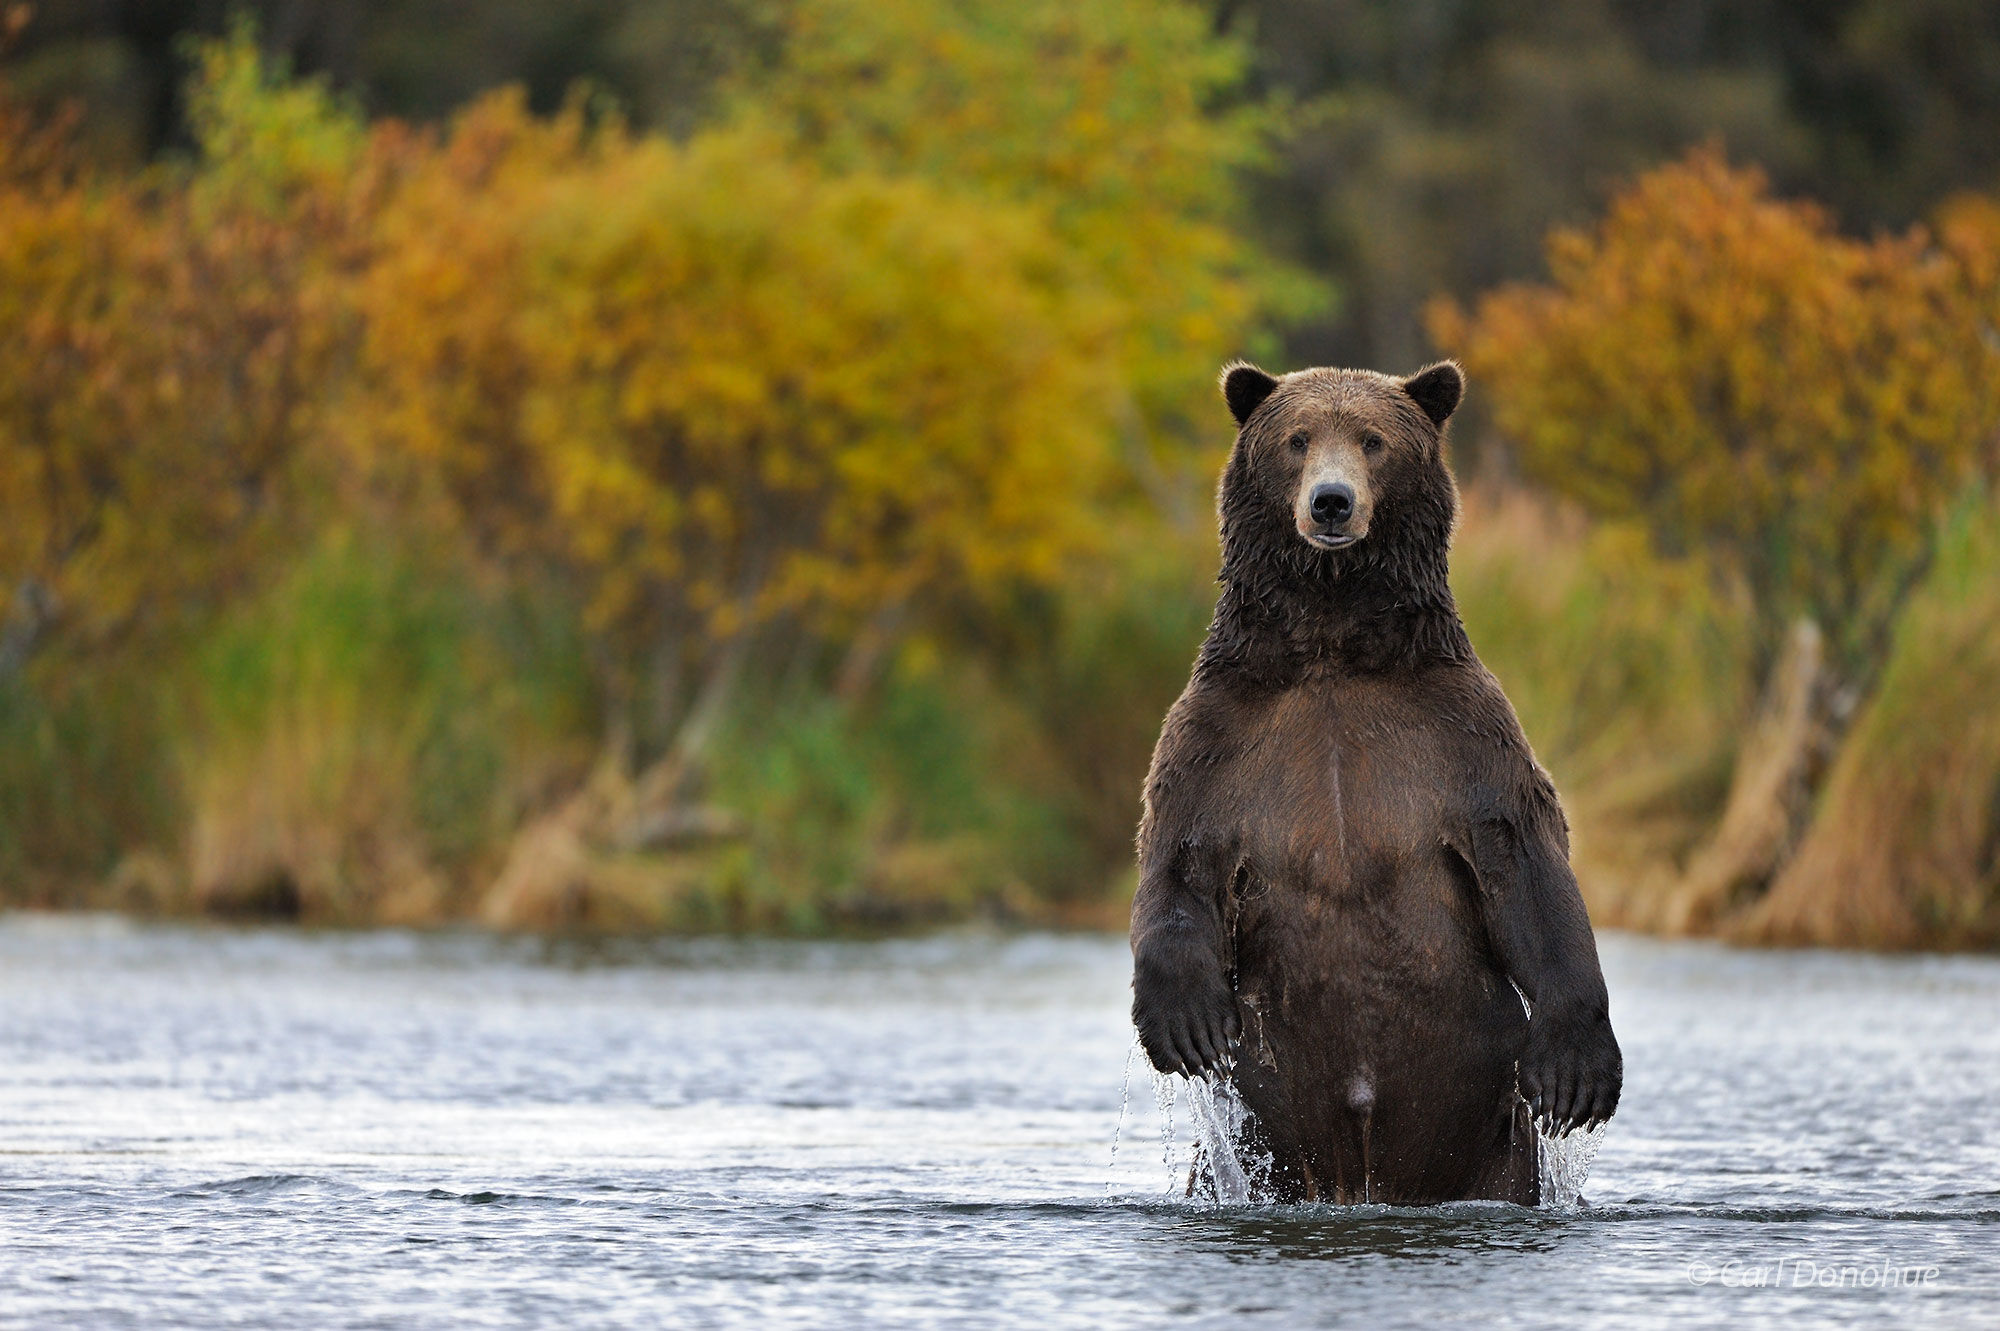 A large male brown bear, or boar, standing upright in Brooks River, fall colors in the background, (Ursus arctos) Katmai National...